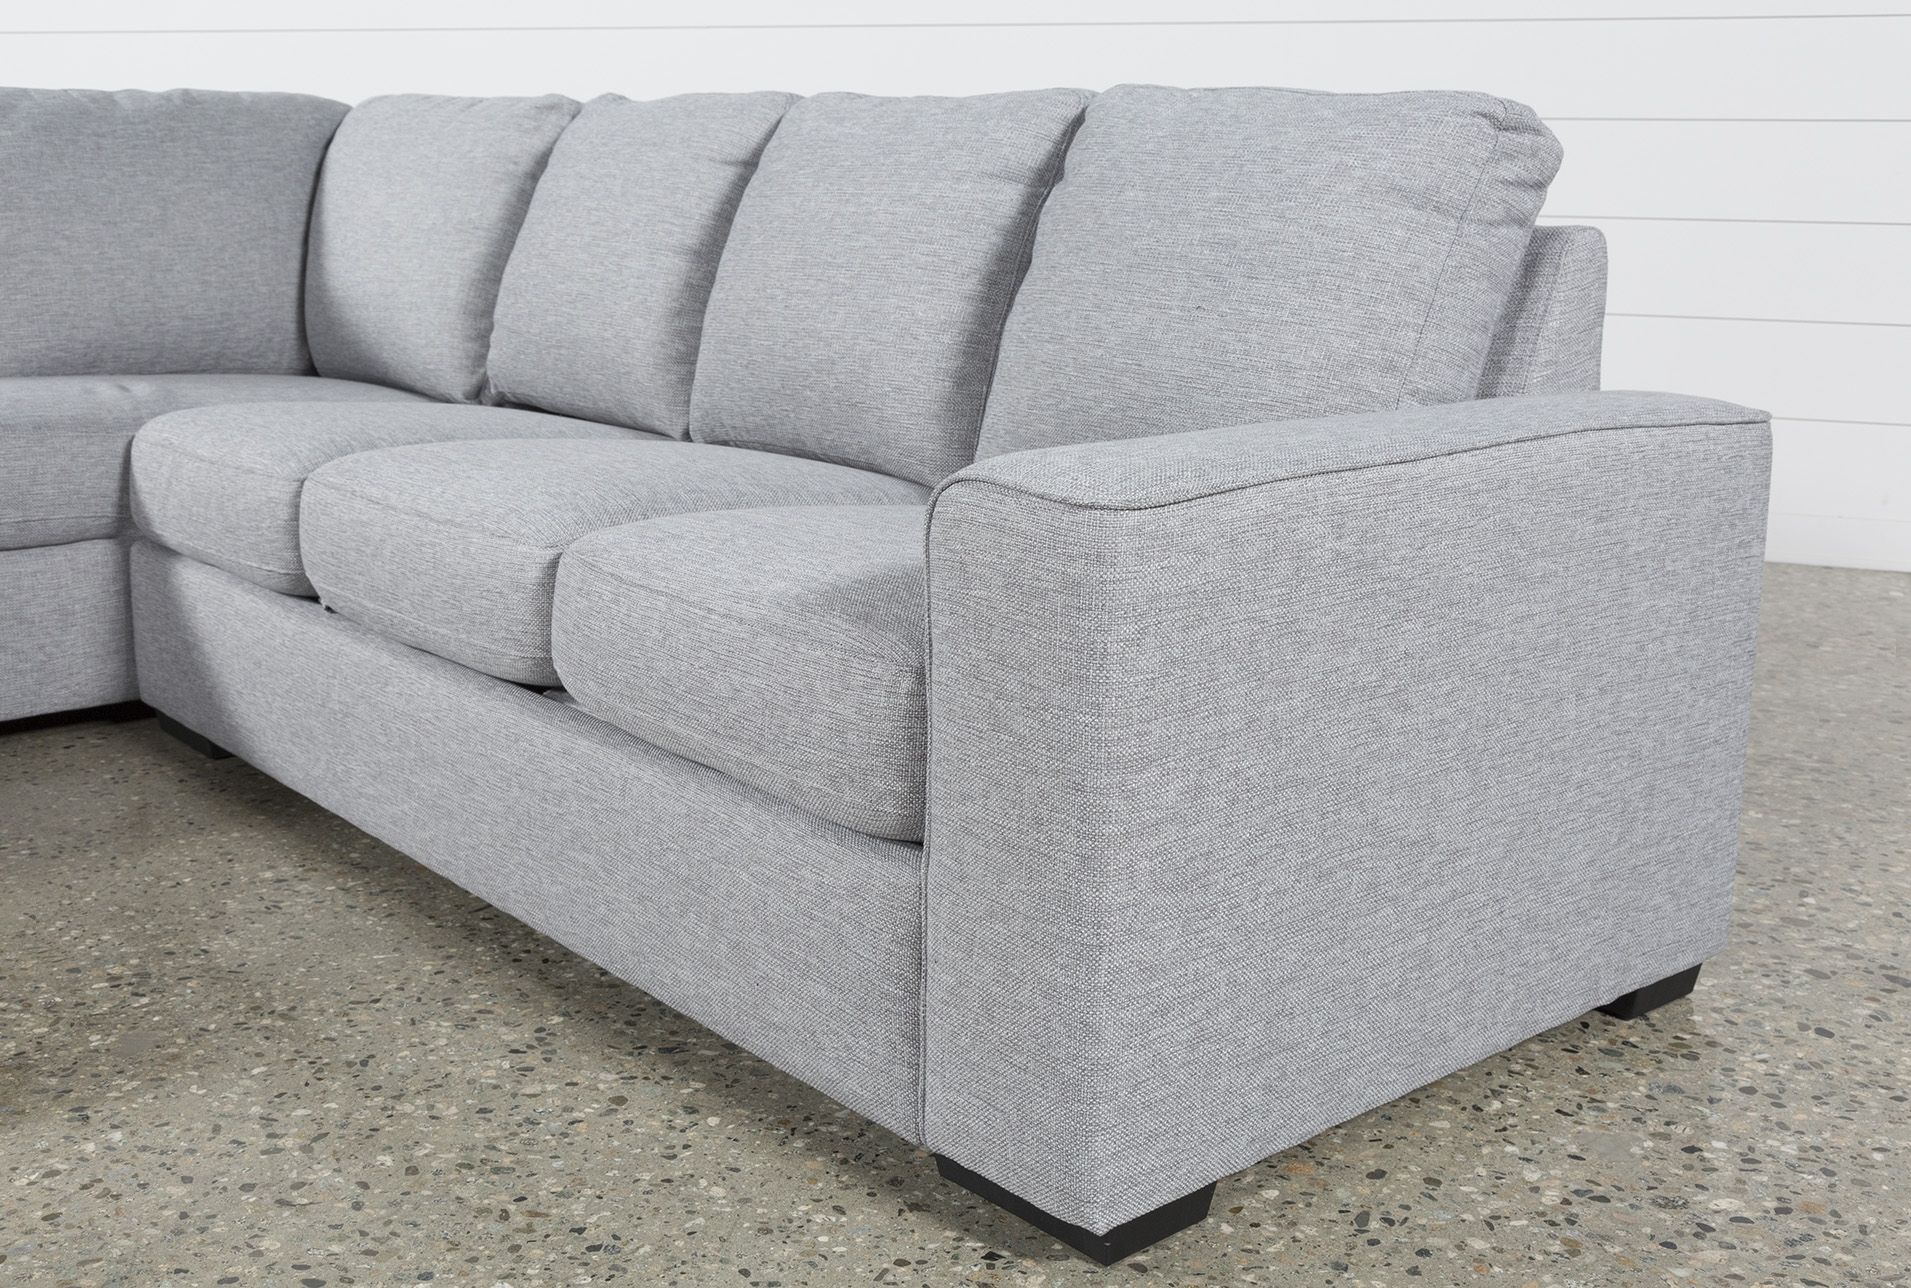 Lucy Grey 2 Piece Sectional W/laf Chaise | Products Inside Lucy Dark Grey 2 Piece Sectionals With Raf Chaise (View 8 of 30)